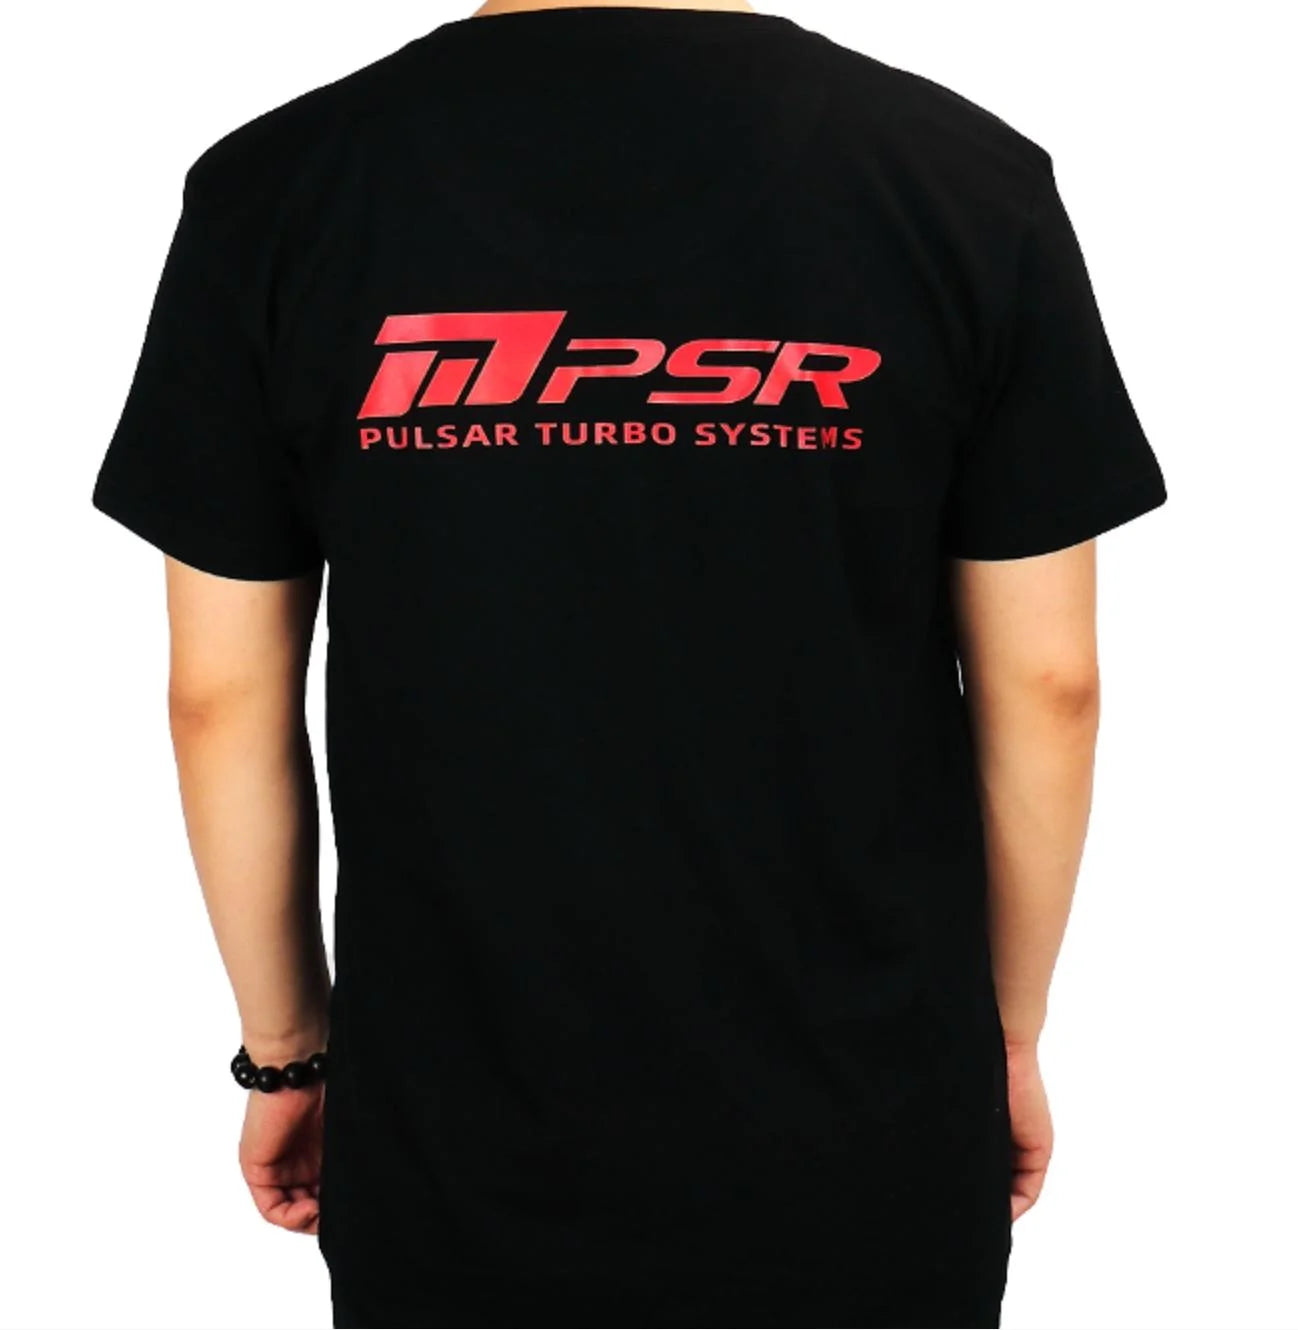 Pulsar Turbo Systems apparel and and accesories are made with care and passion for the pulsar brand. Pulsar turbo T-shirts come in various designs and sizes. Visit our shop for the best deals.  